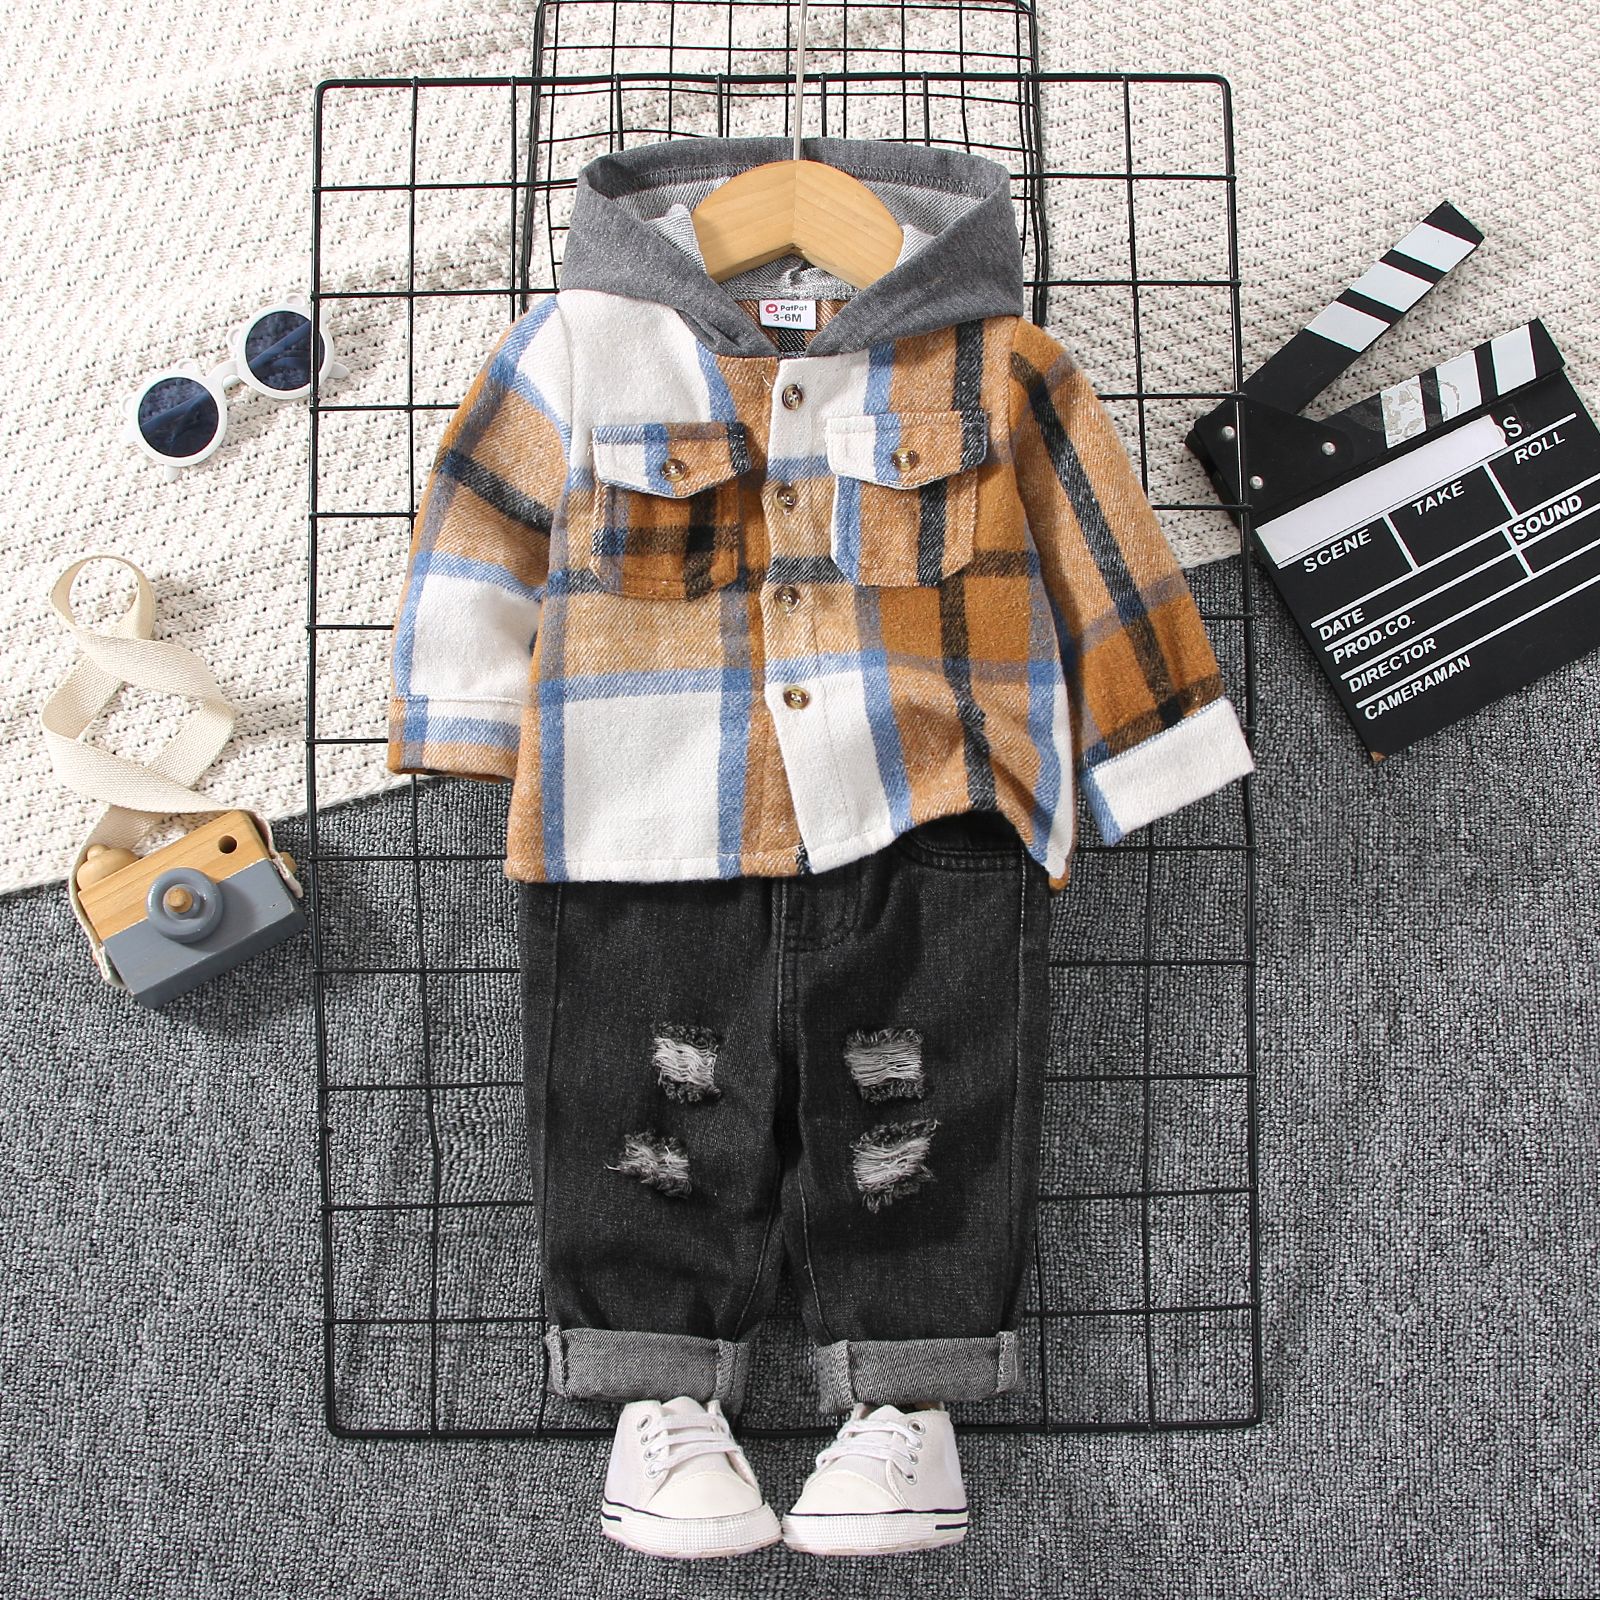 2pcs Baby Boy Long-sleeve Hooded Plaid Jacket and Ripped Jeans Set